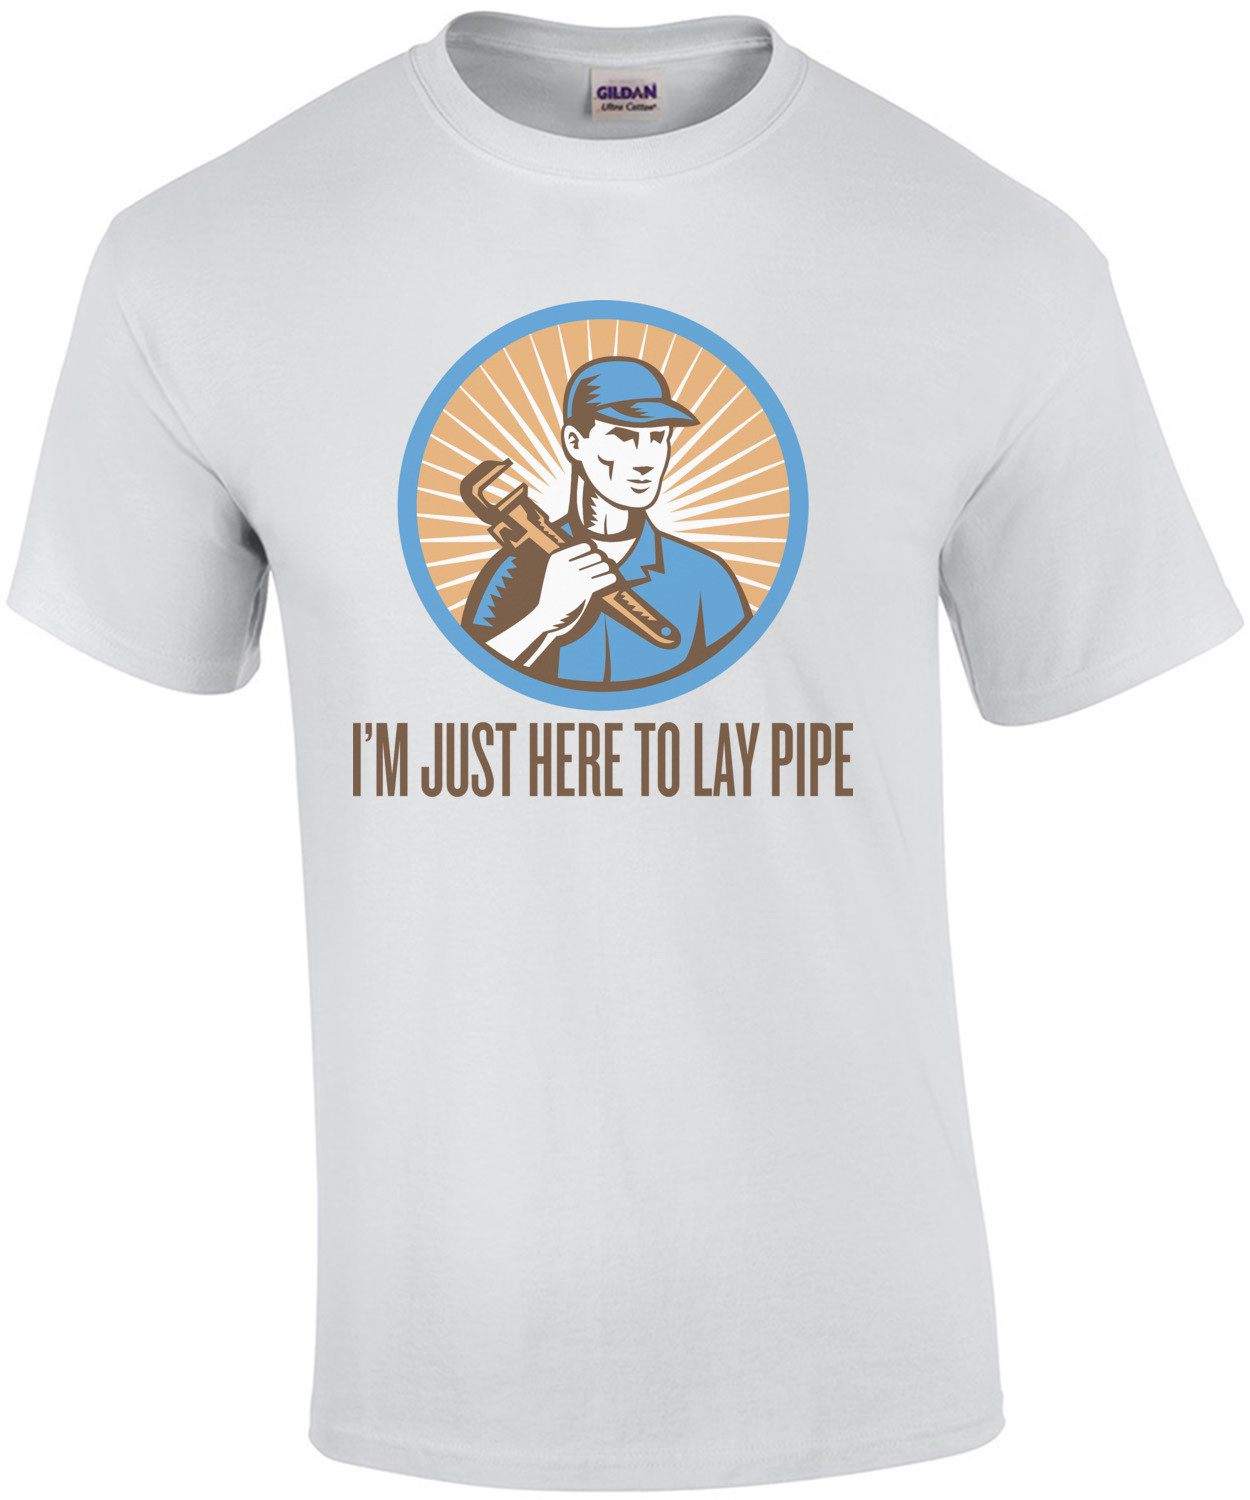 I'm Just Here To Lay Pipe Shirt shirt